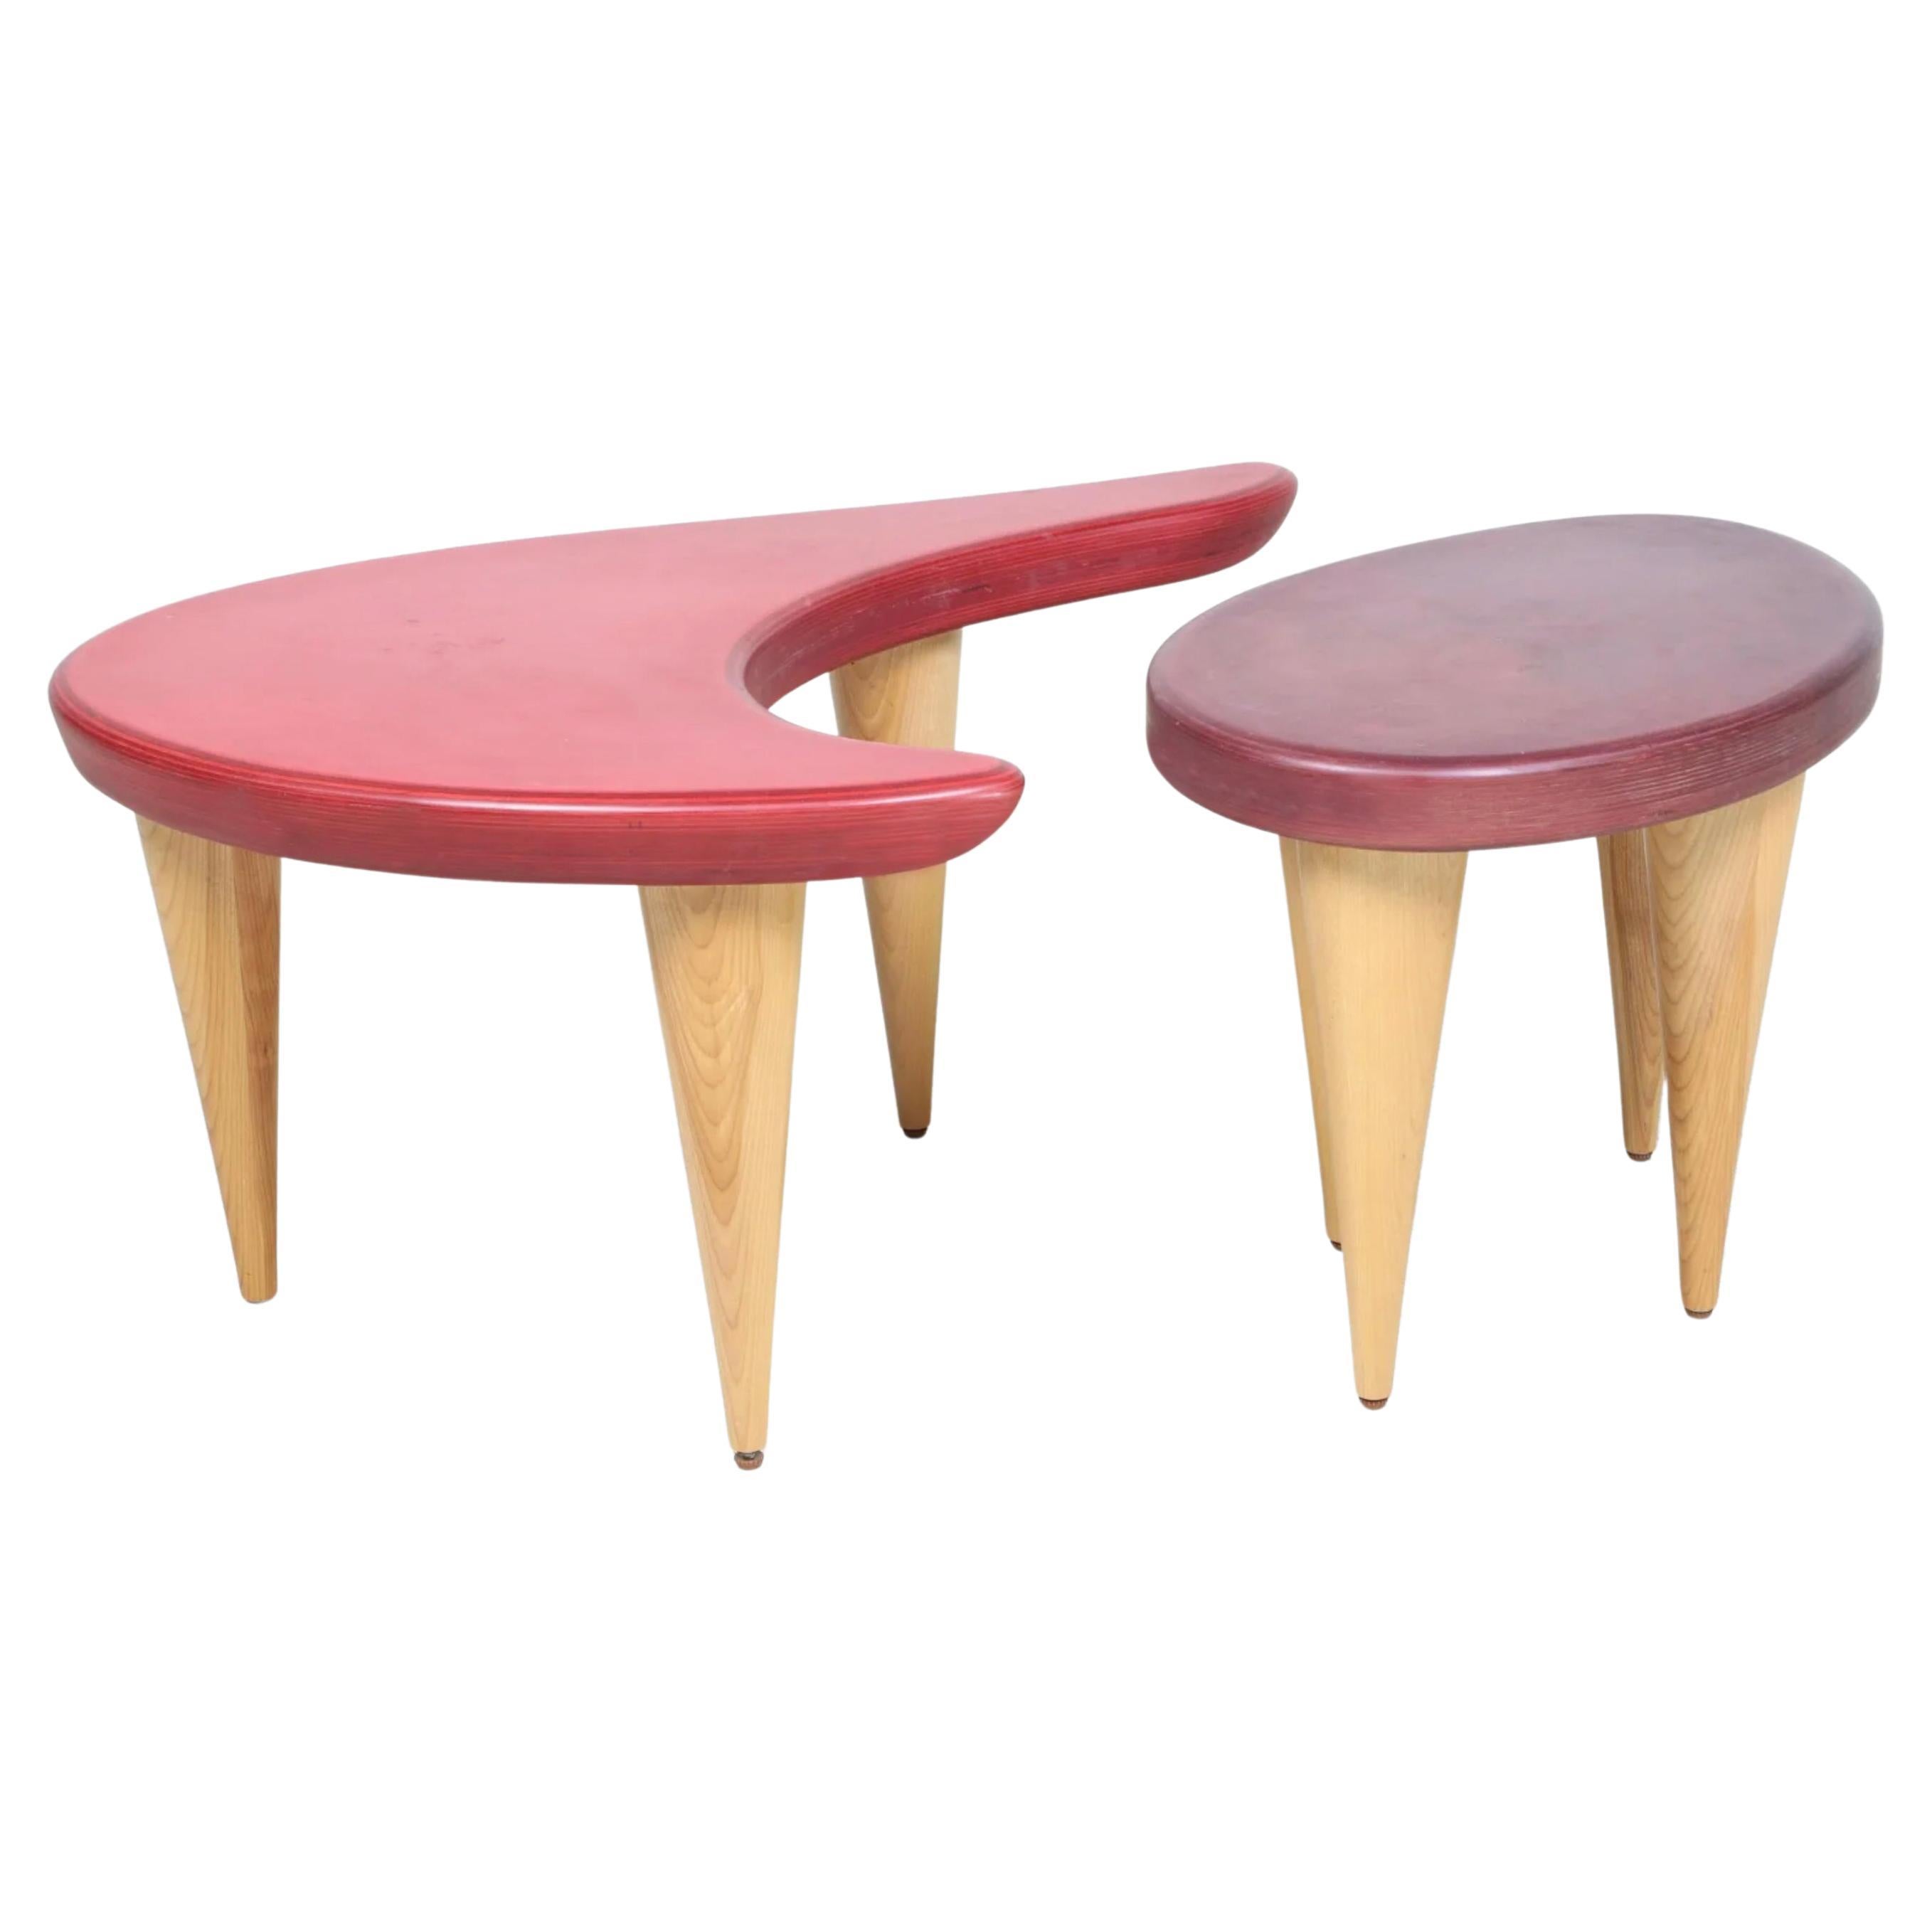 Post Modern Set of Organic Biomorphic Studio Craft Coffee table or end tables. Tables nest into each other you are buying the set of (2) Tables. All solid wood - Stained color tops with Blonde maple tapered legs. Very Cool se of tables. 

Both